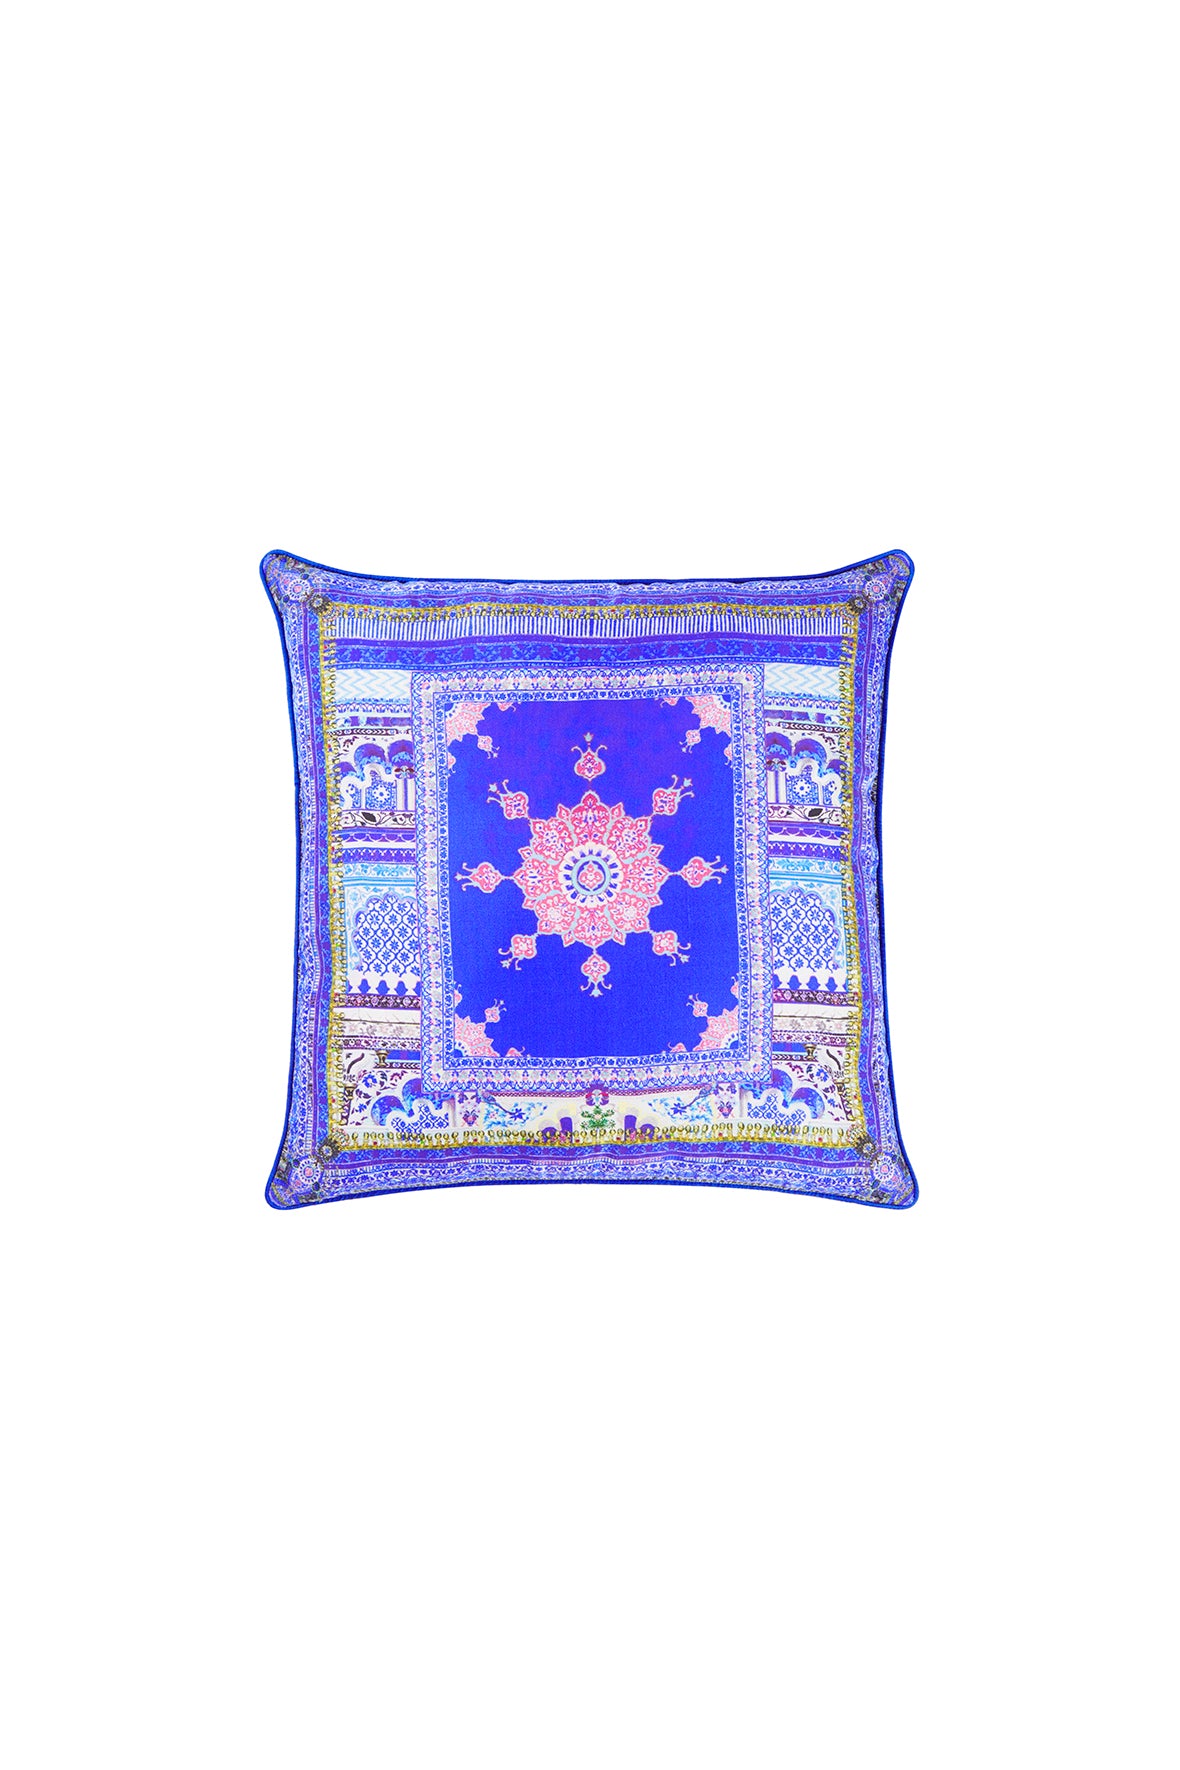 IN THE CONSTELLATIONS SMALL SQUARE CUSHION